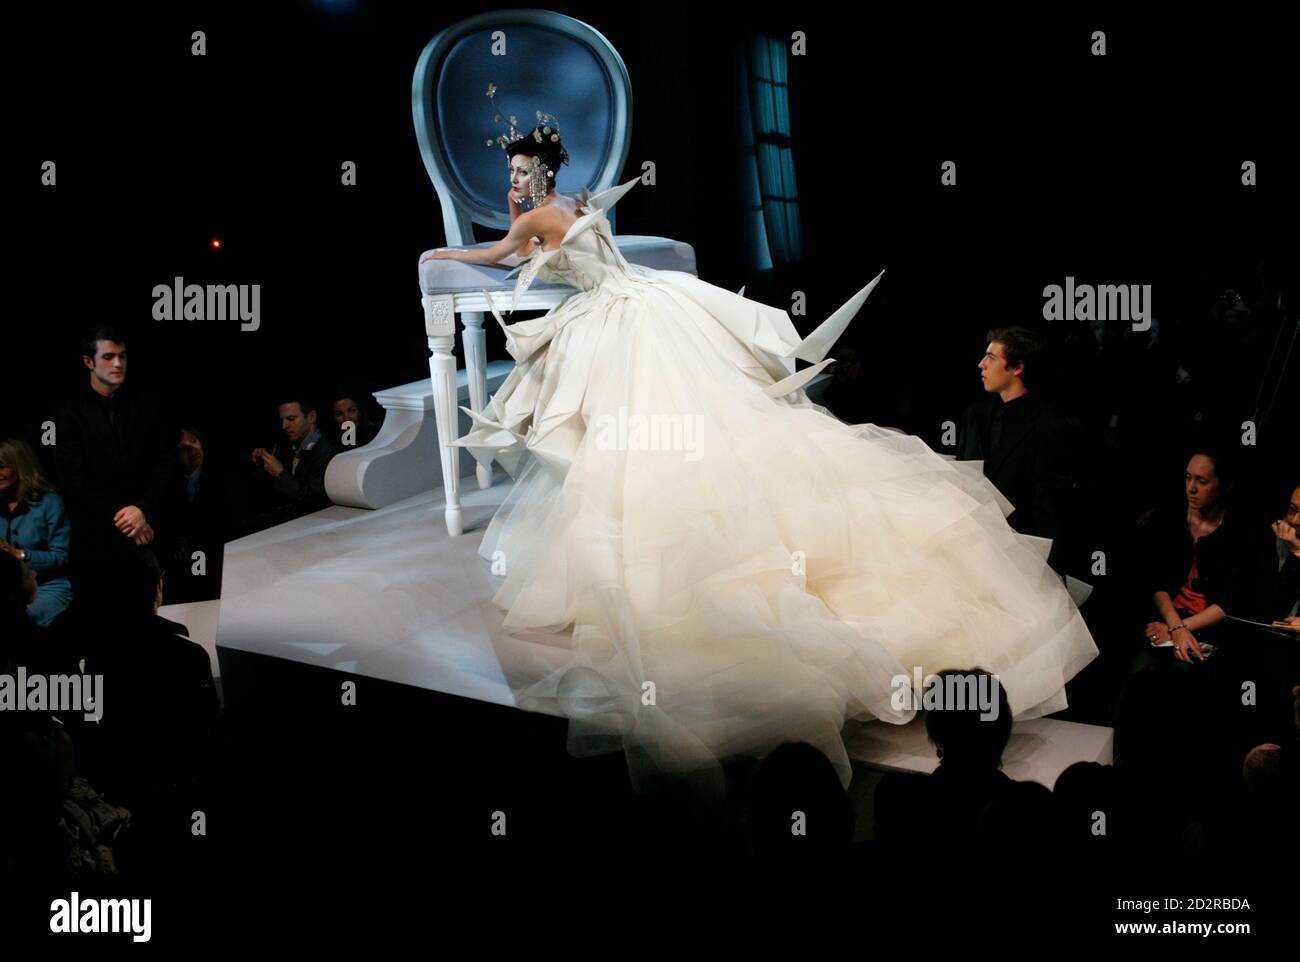 A model presents a wedding dress creation by British designer John Galliano  as part of French fashion house Dior's Spring-Summer 2007 Haute Couture  collection in Paris, January 22, 2007. REUTERS/Philippe Wojazer (FRANCE